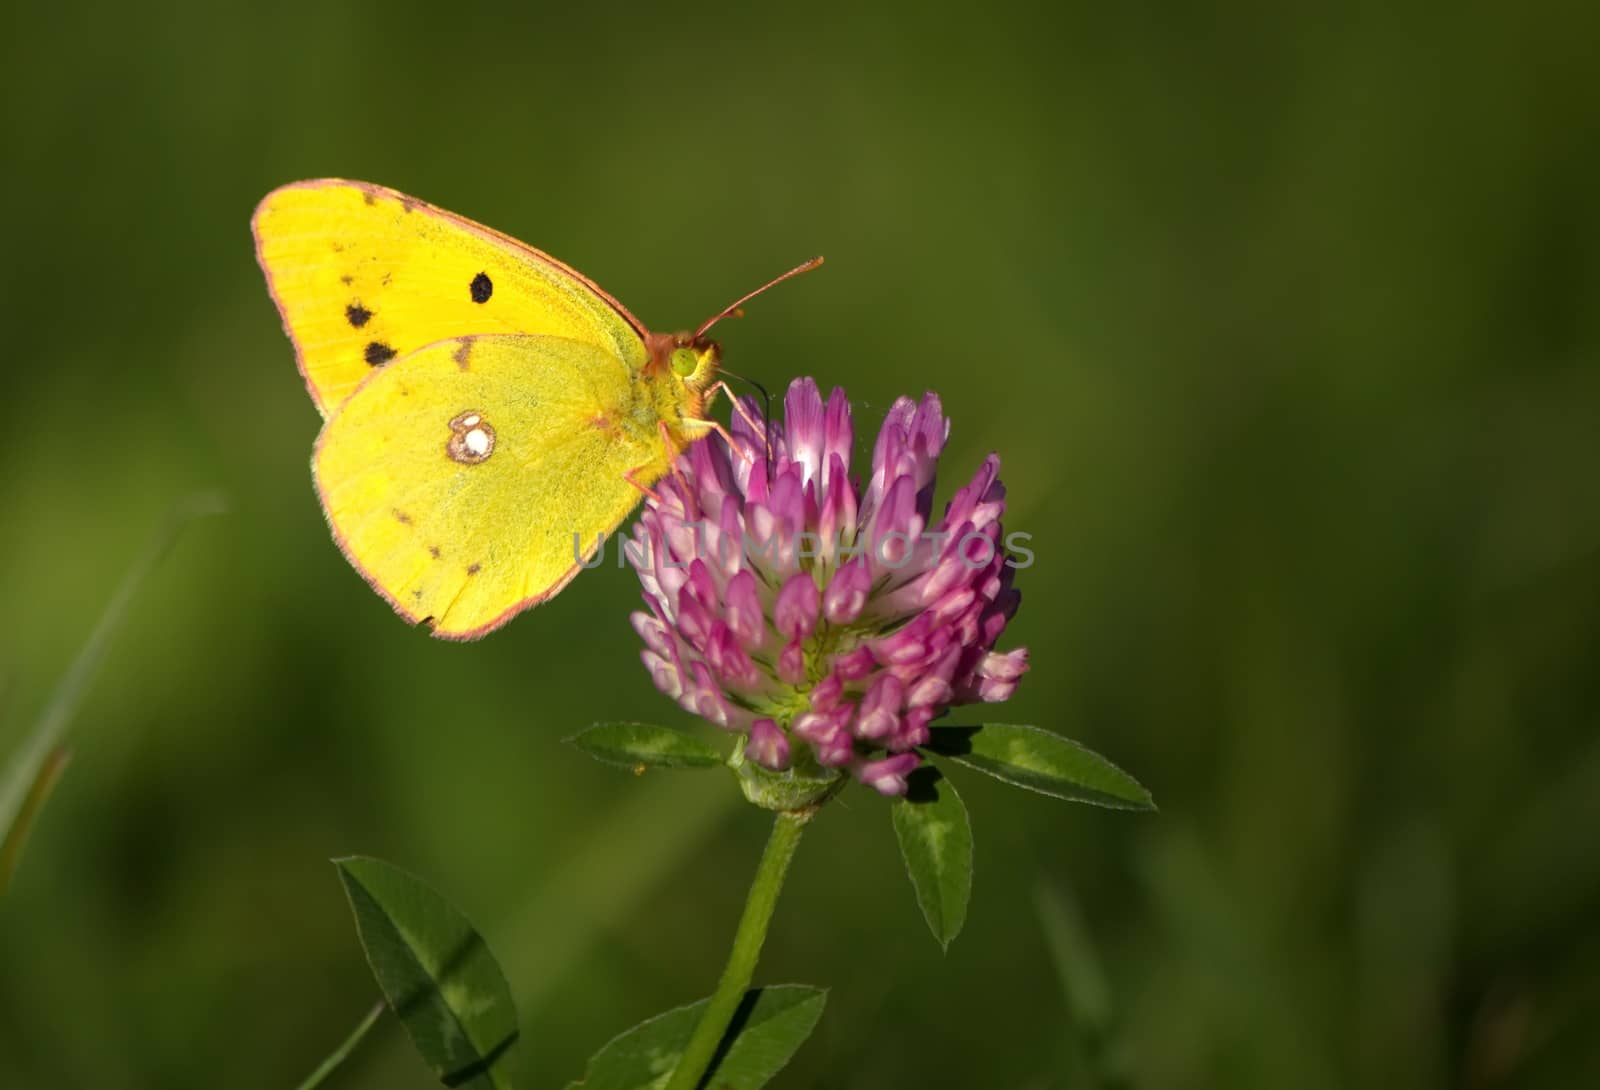 Clouded yellow butterfly by Elenaphotos21